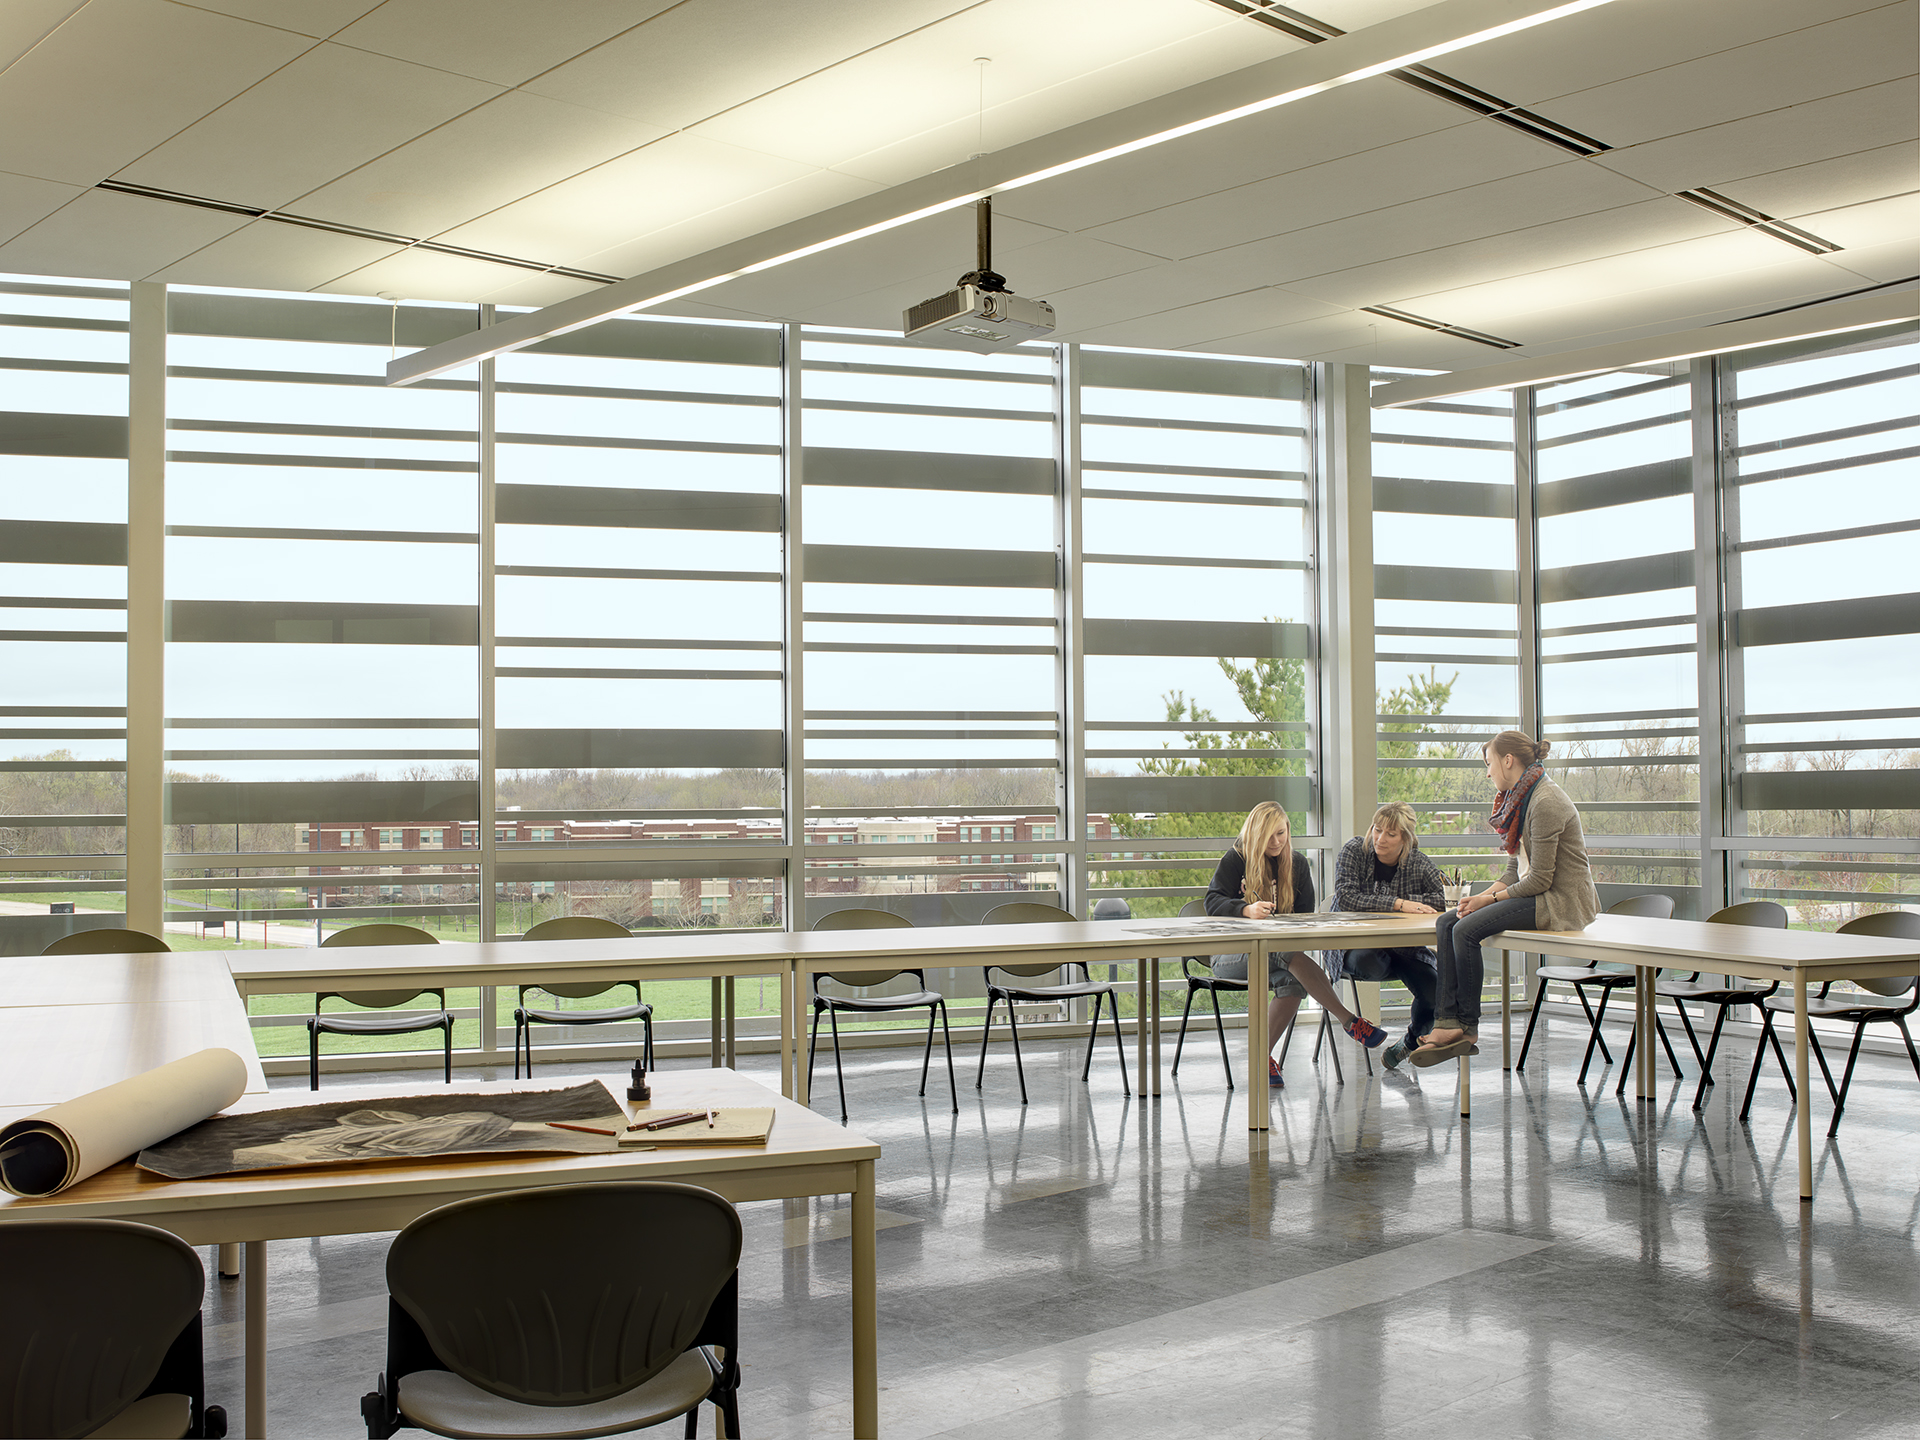 southern illinois university art and design building interior designed by trivers firm